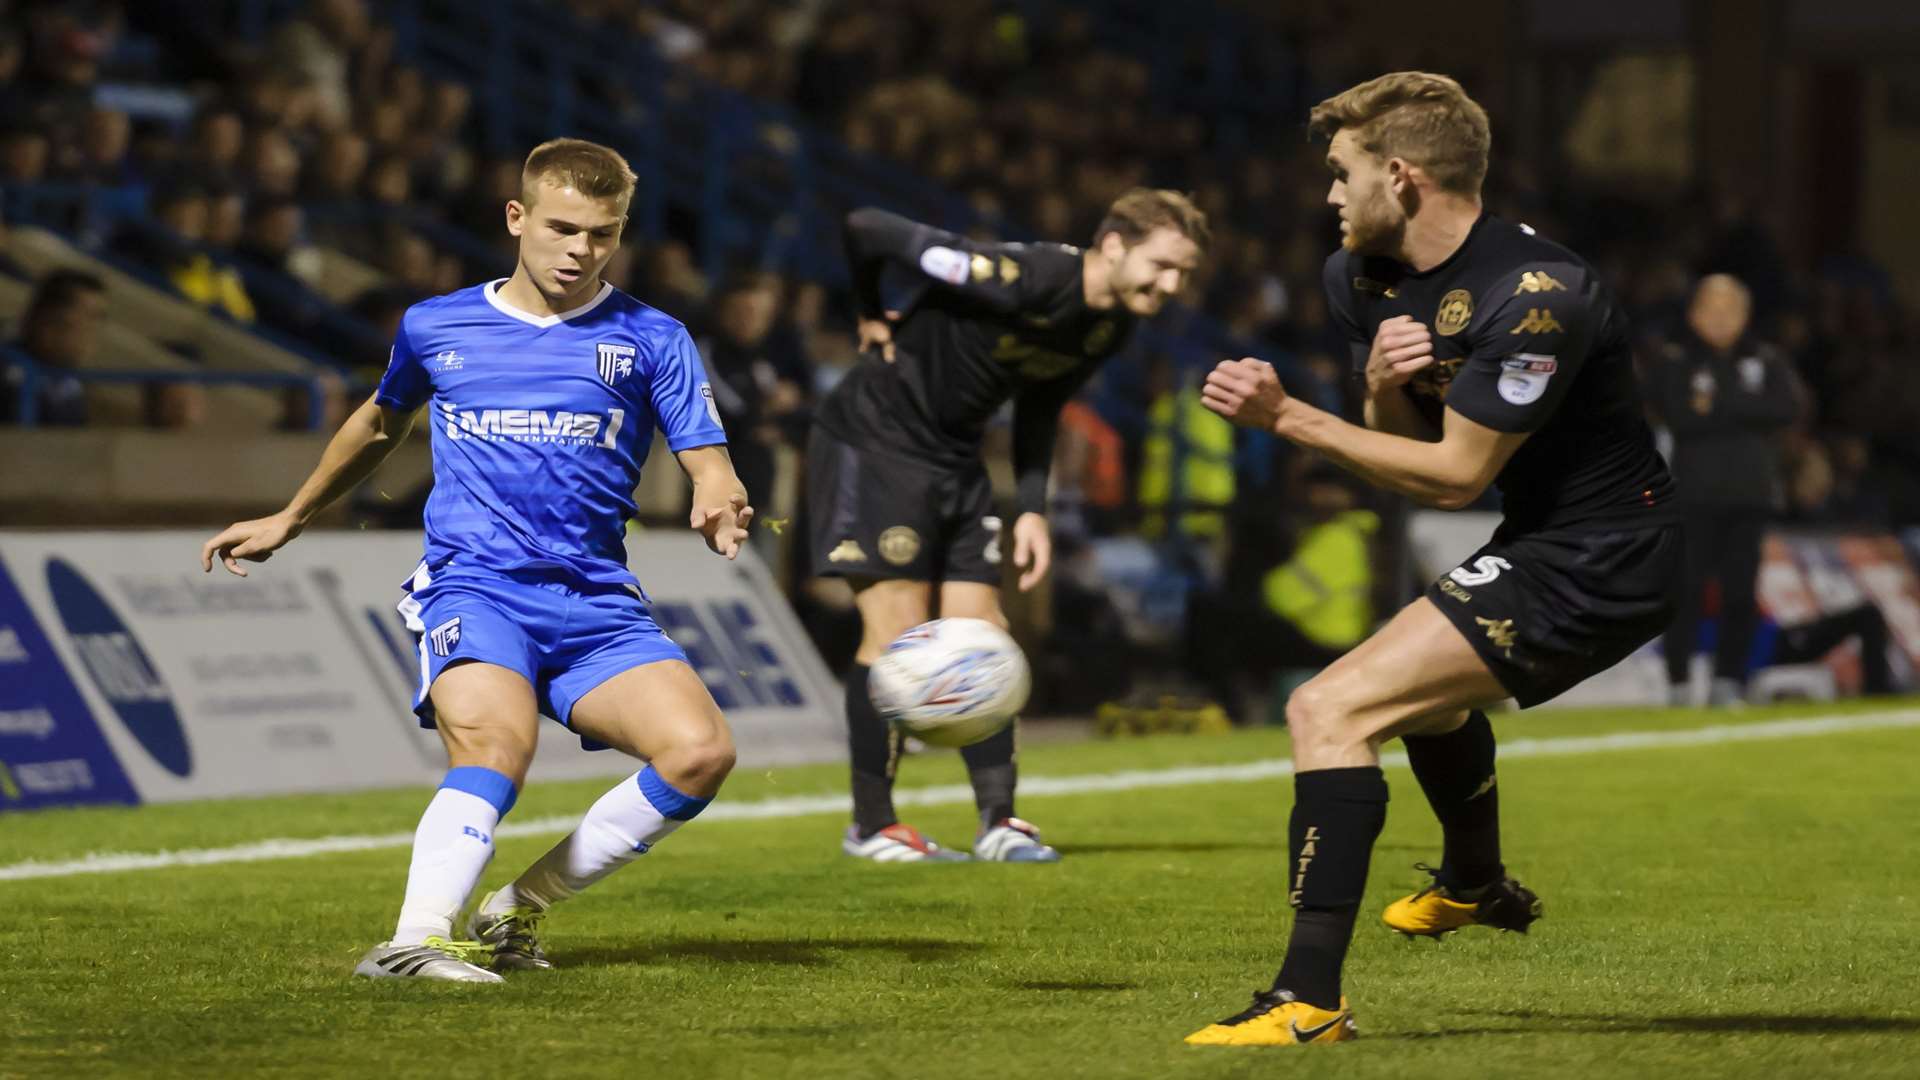 Jake Hessenthaler gets his cross in Picture: Andy Payton